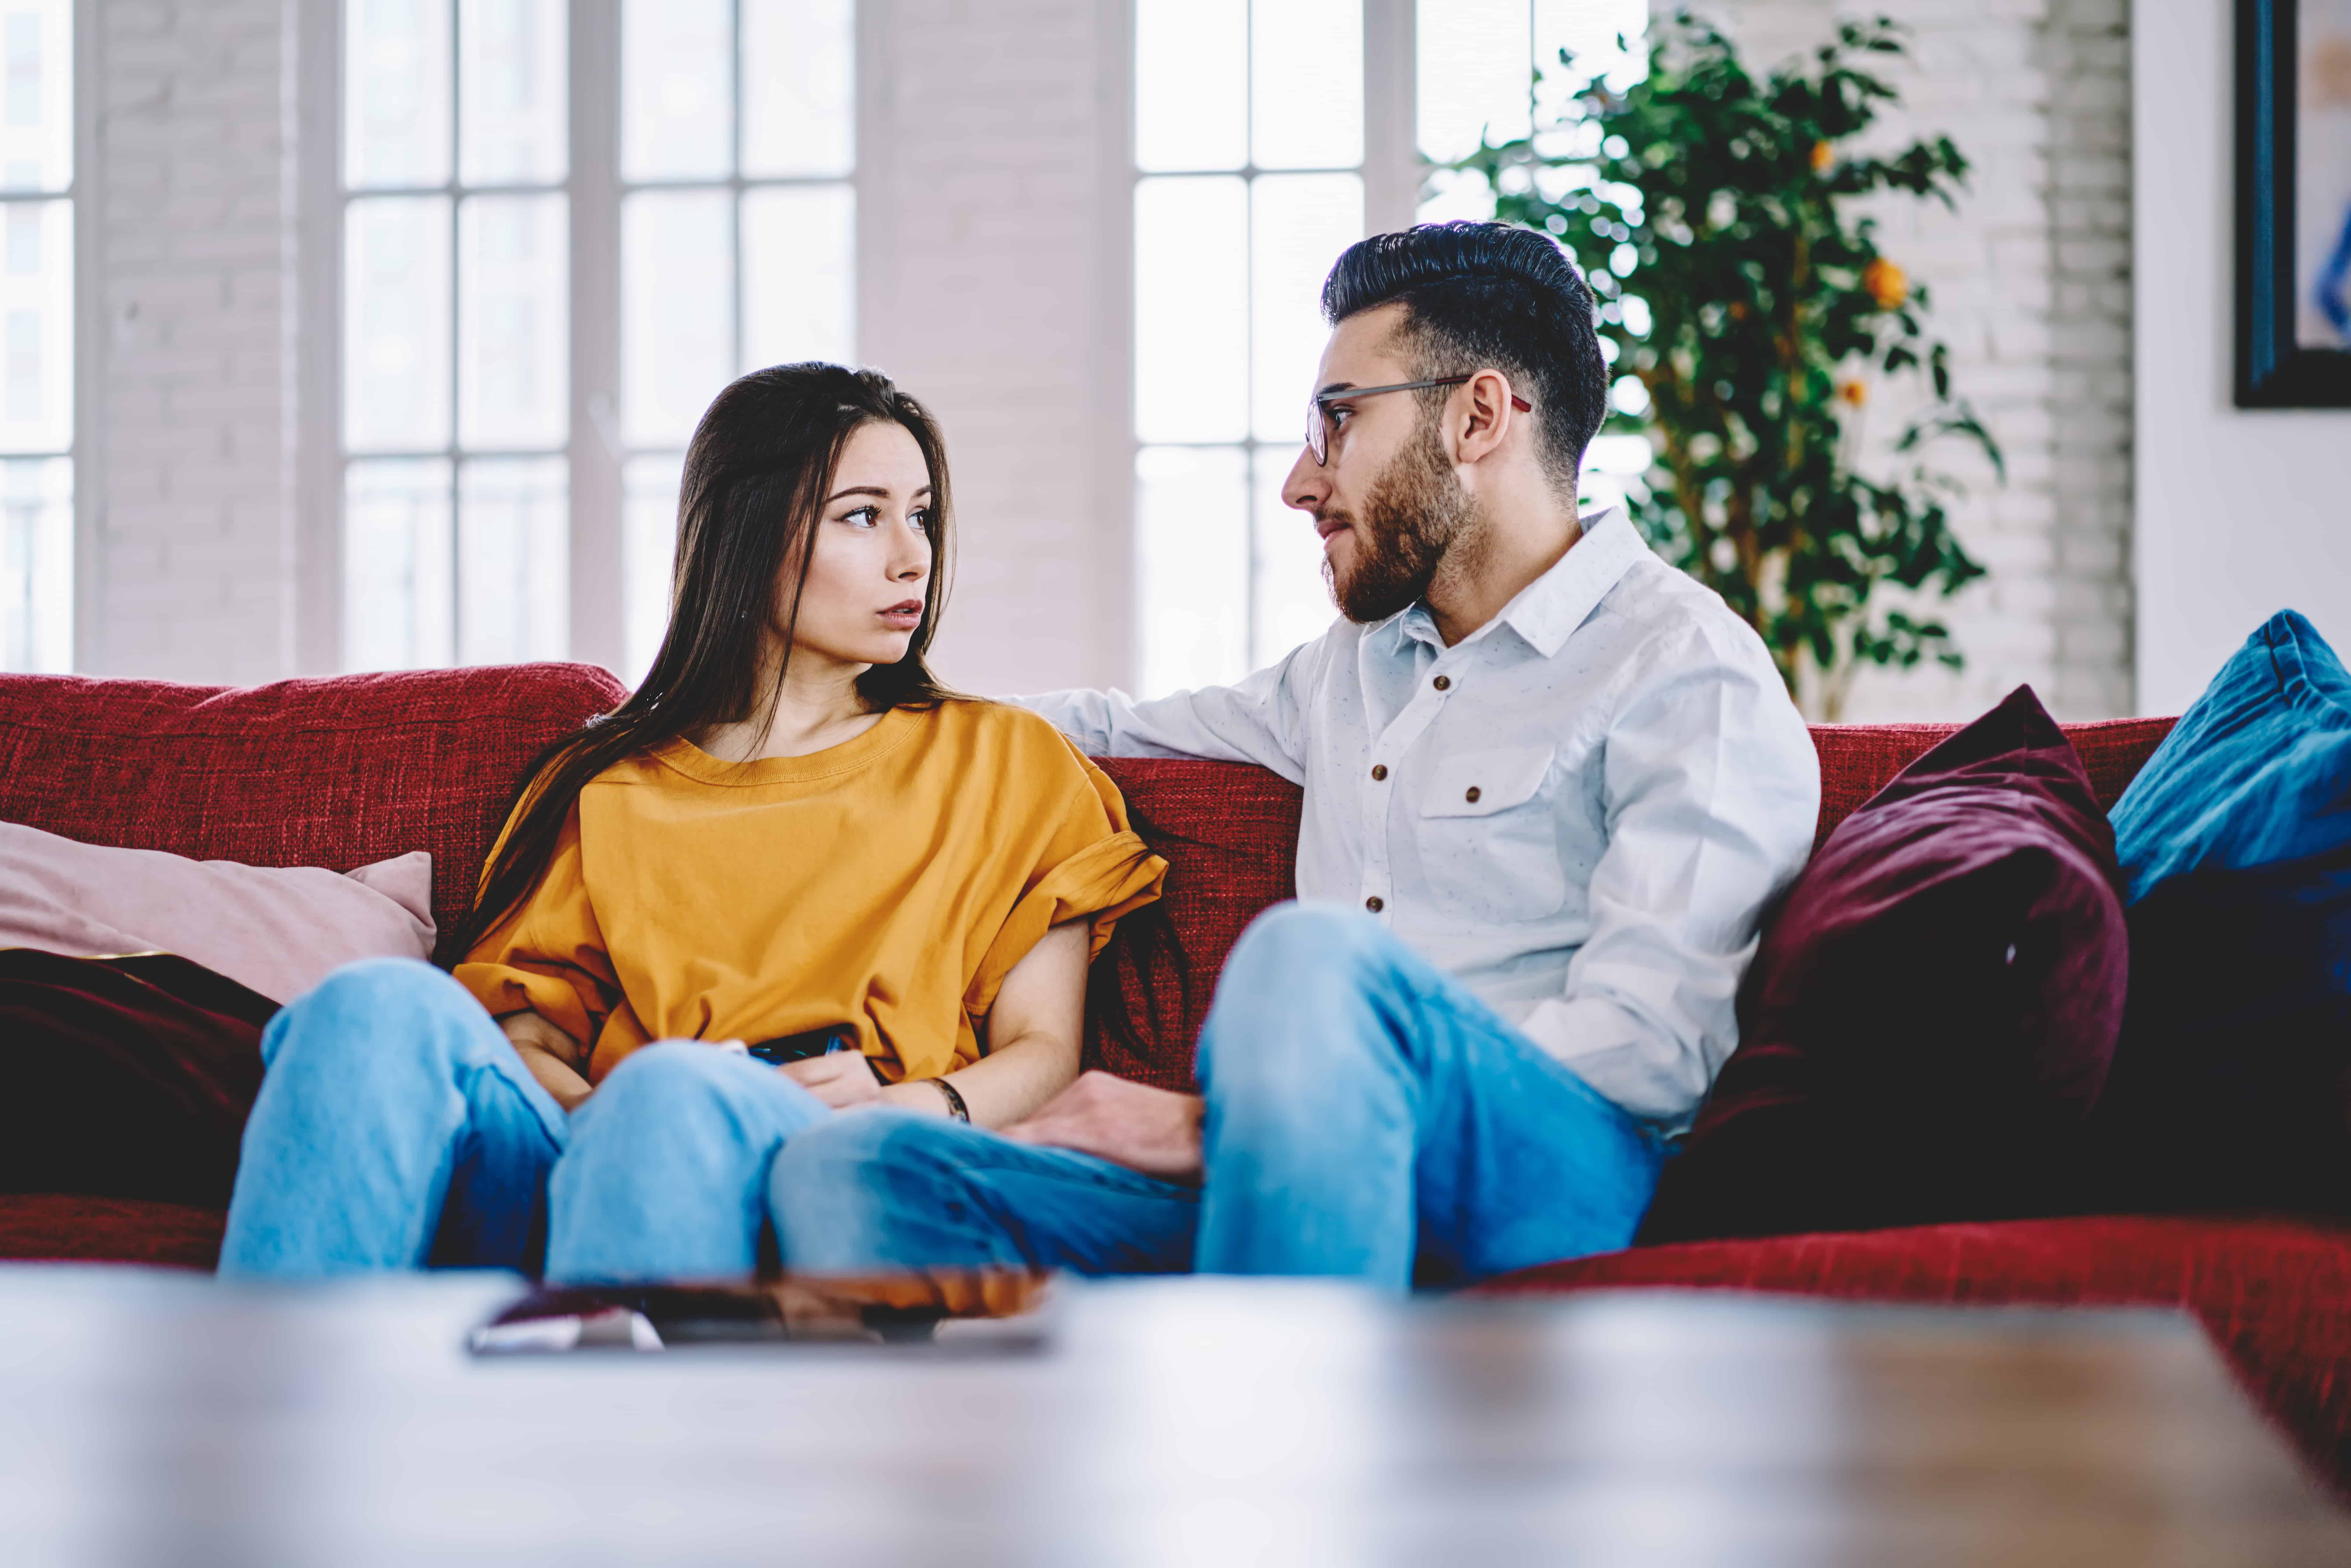 build emotional intimacy in marriage by not avoiding difficult conversations